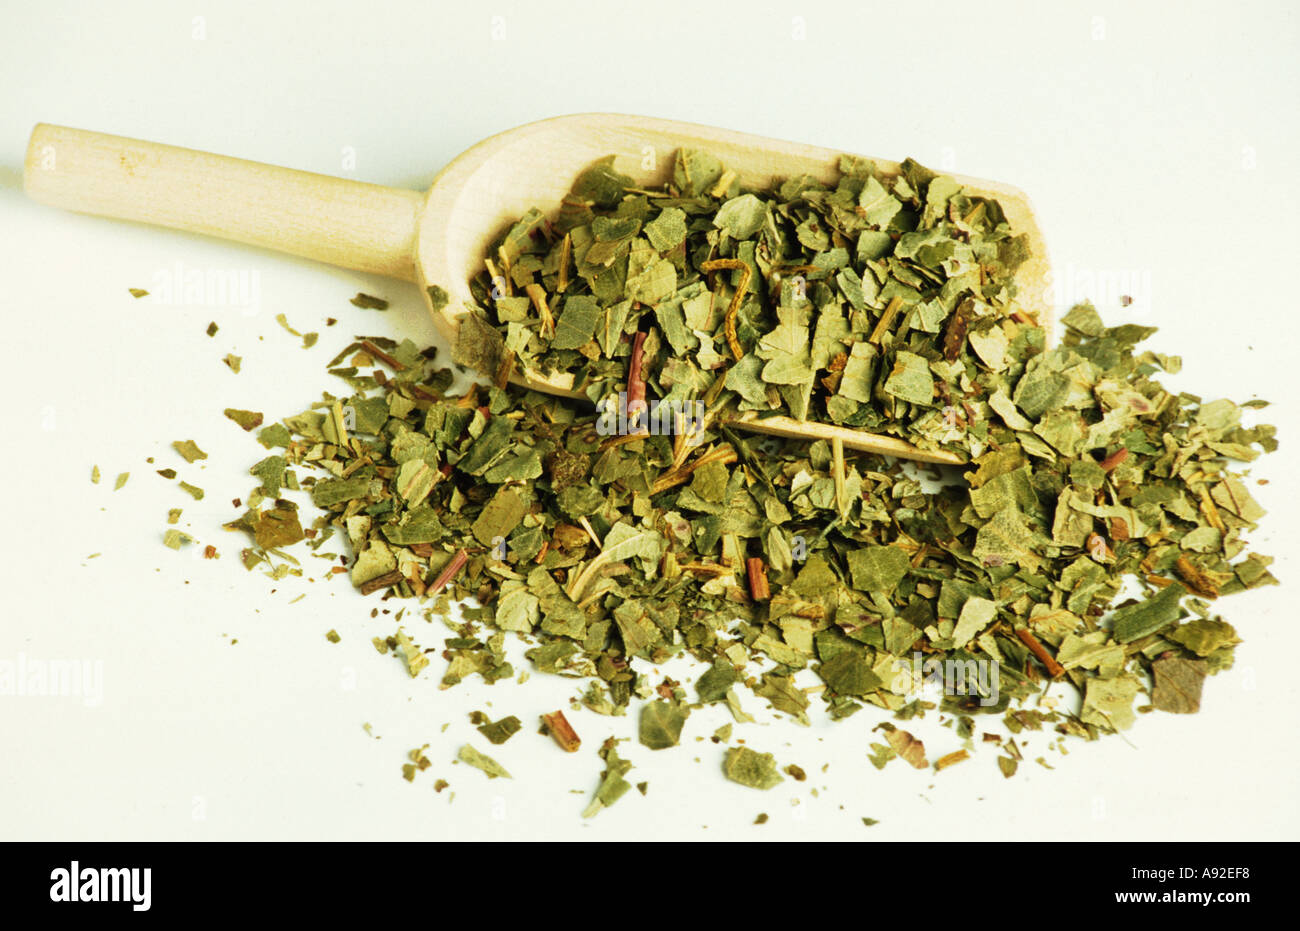 Medicinal plant Fragaria vesca Forest Strawberry leaves wood Walderdbeere Blätter dried dry Stock Photo